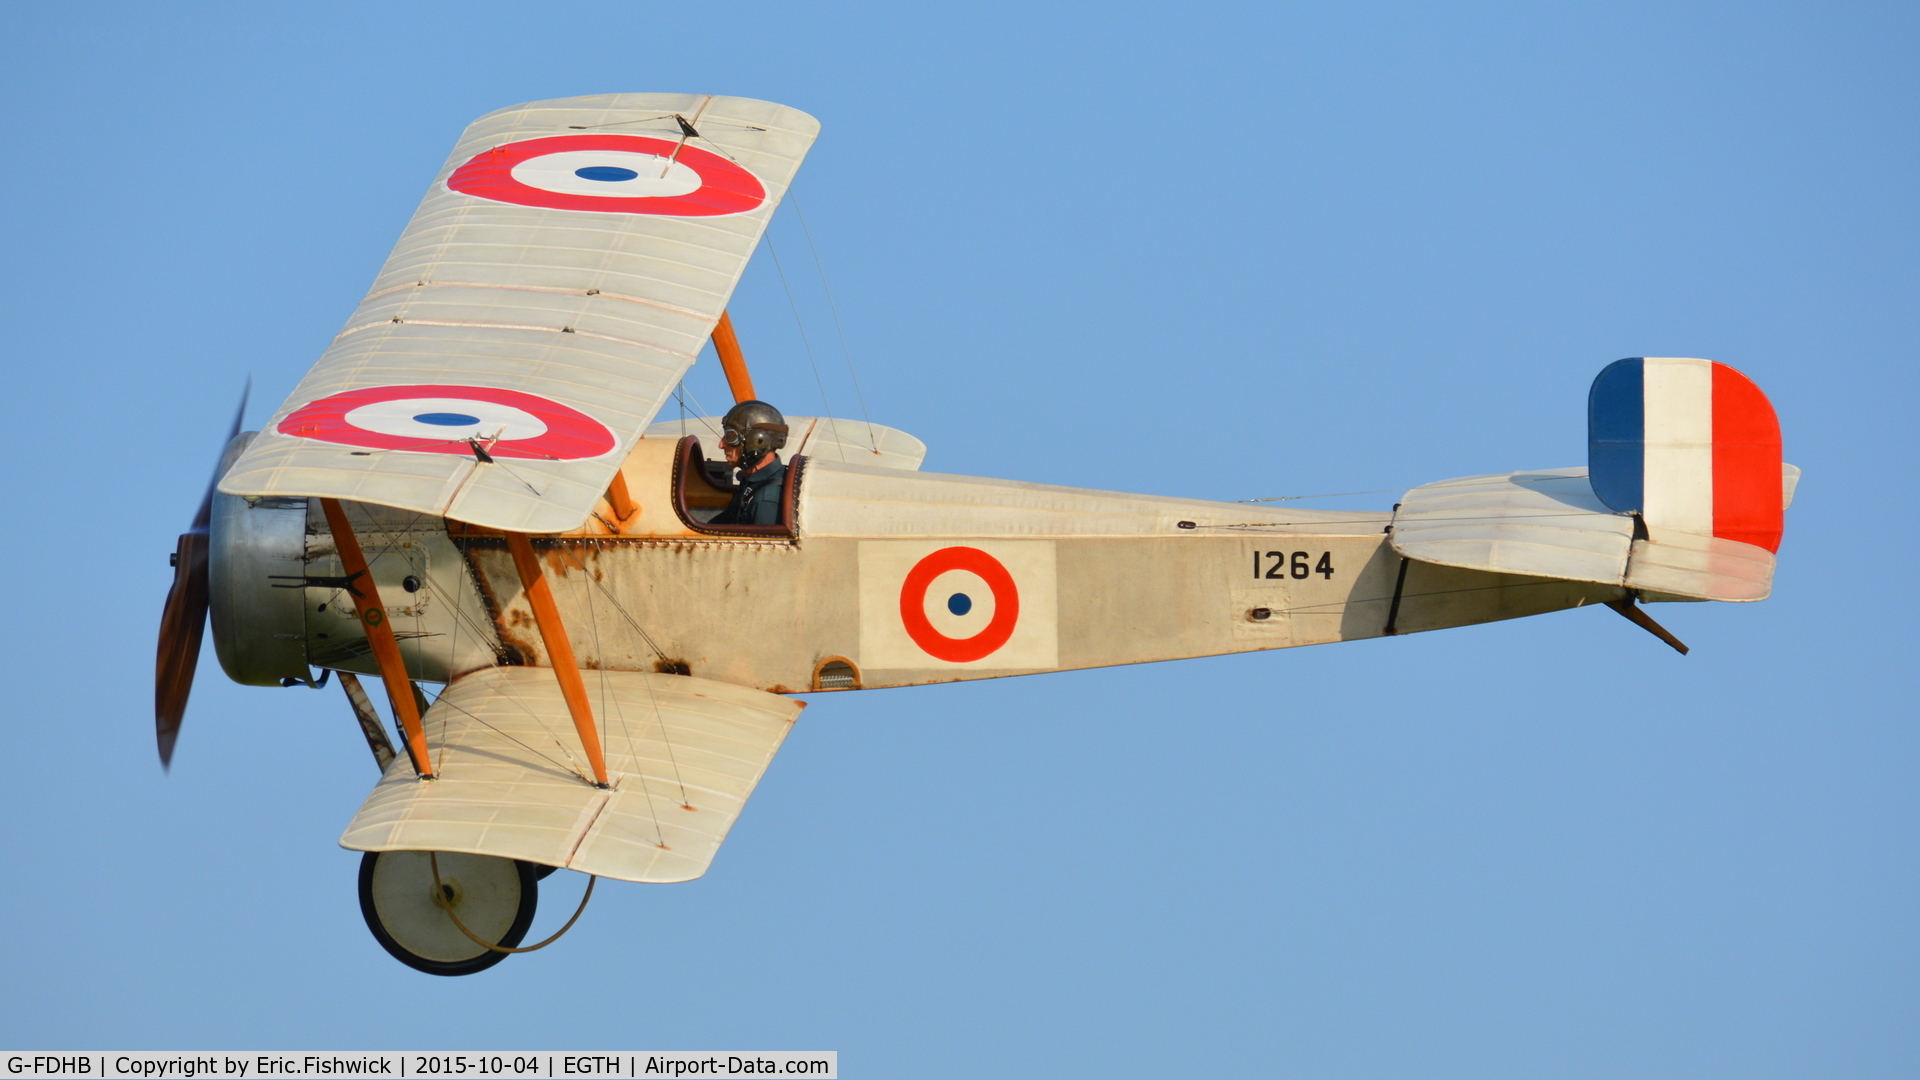 G-FDHB, 2014 Bristol Scout C Replica C/N LAA 353-14755, 41. G-FDHB in display mode at The Shuttleworth 'Uncovered' Airshow (Finale,) Oct. 2015.